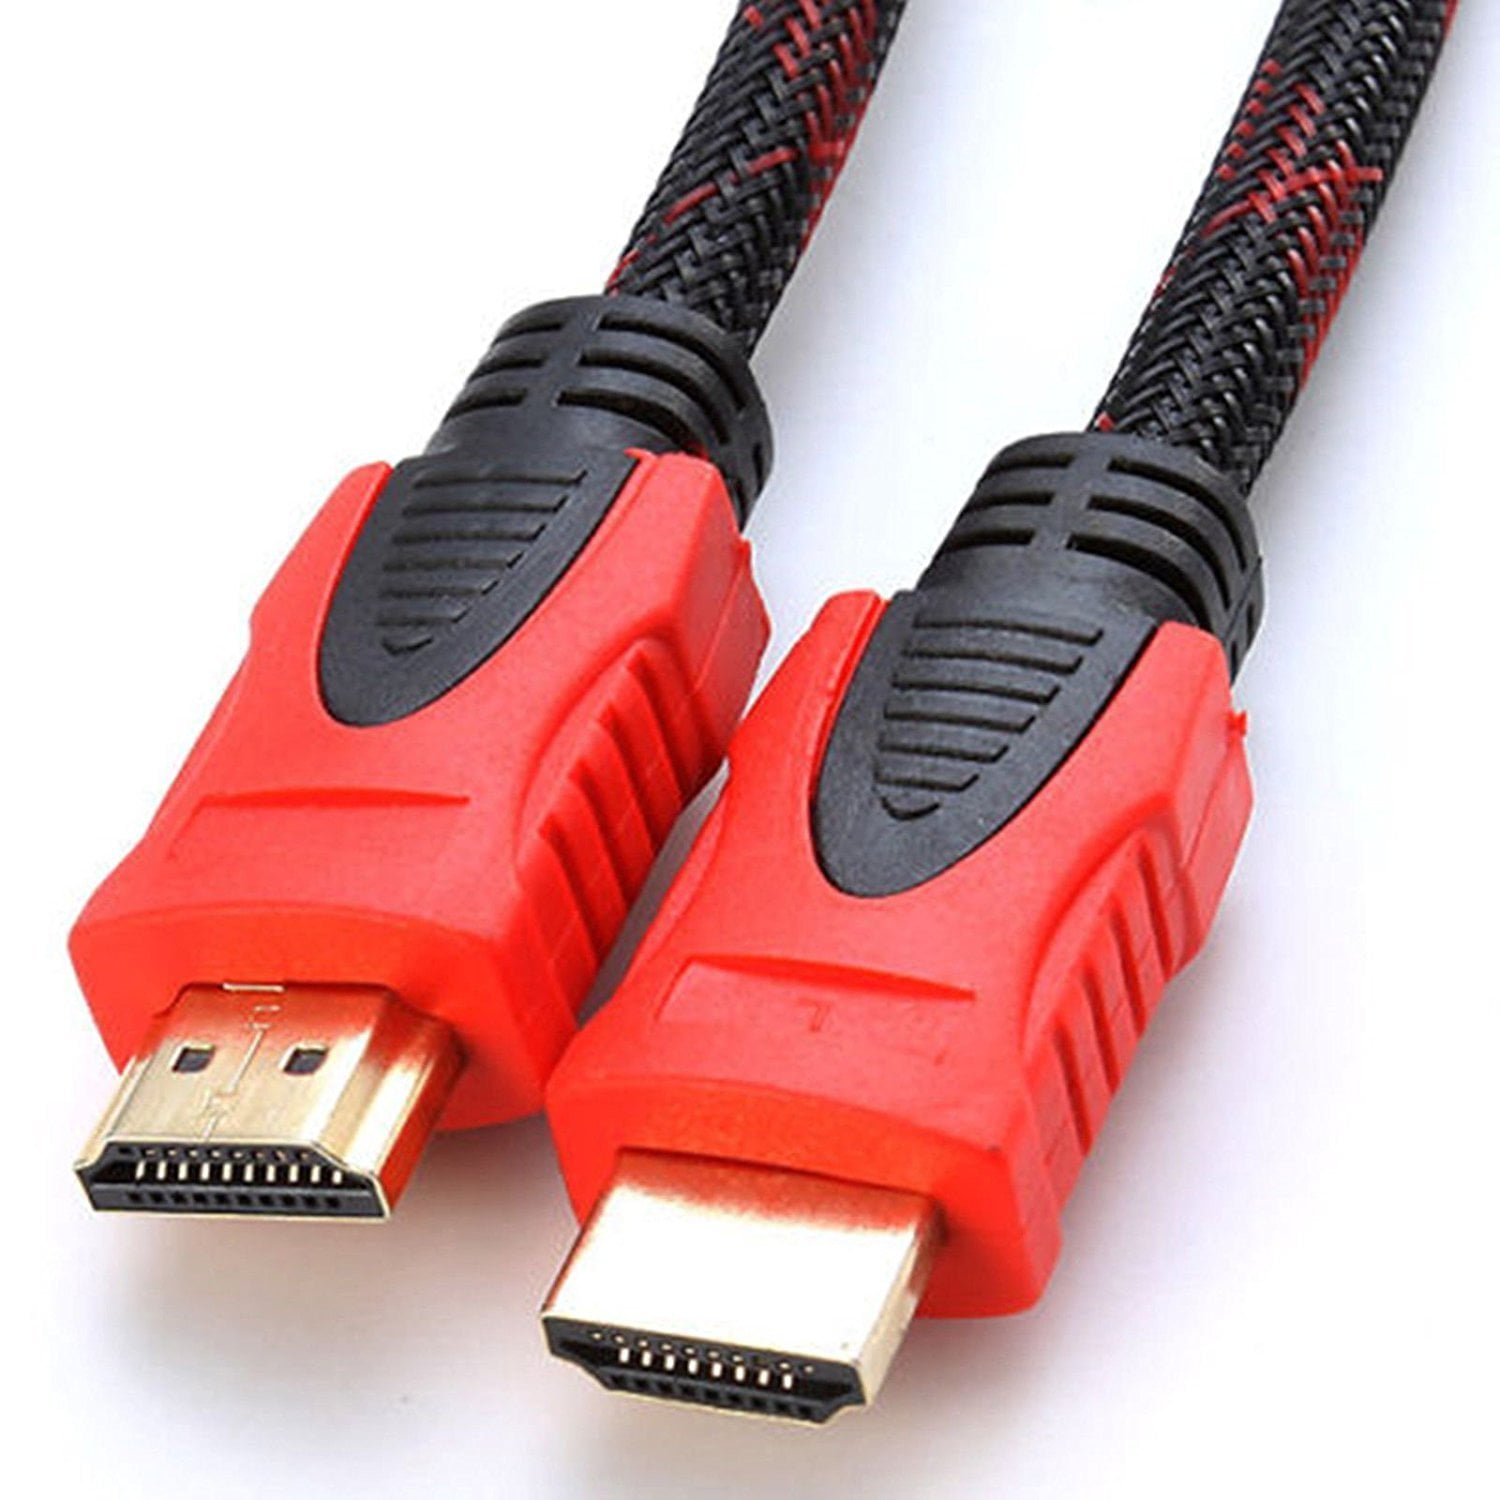 High Speed with Ethernet v1.4 HDMI Swivel Rotate Cable Gold LCD LED HDTV PS3 